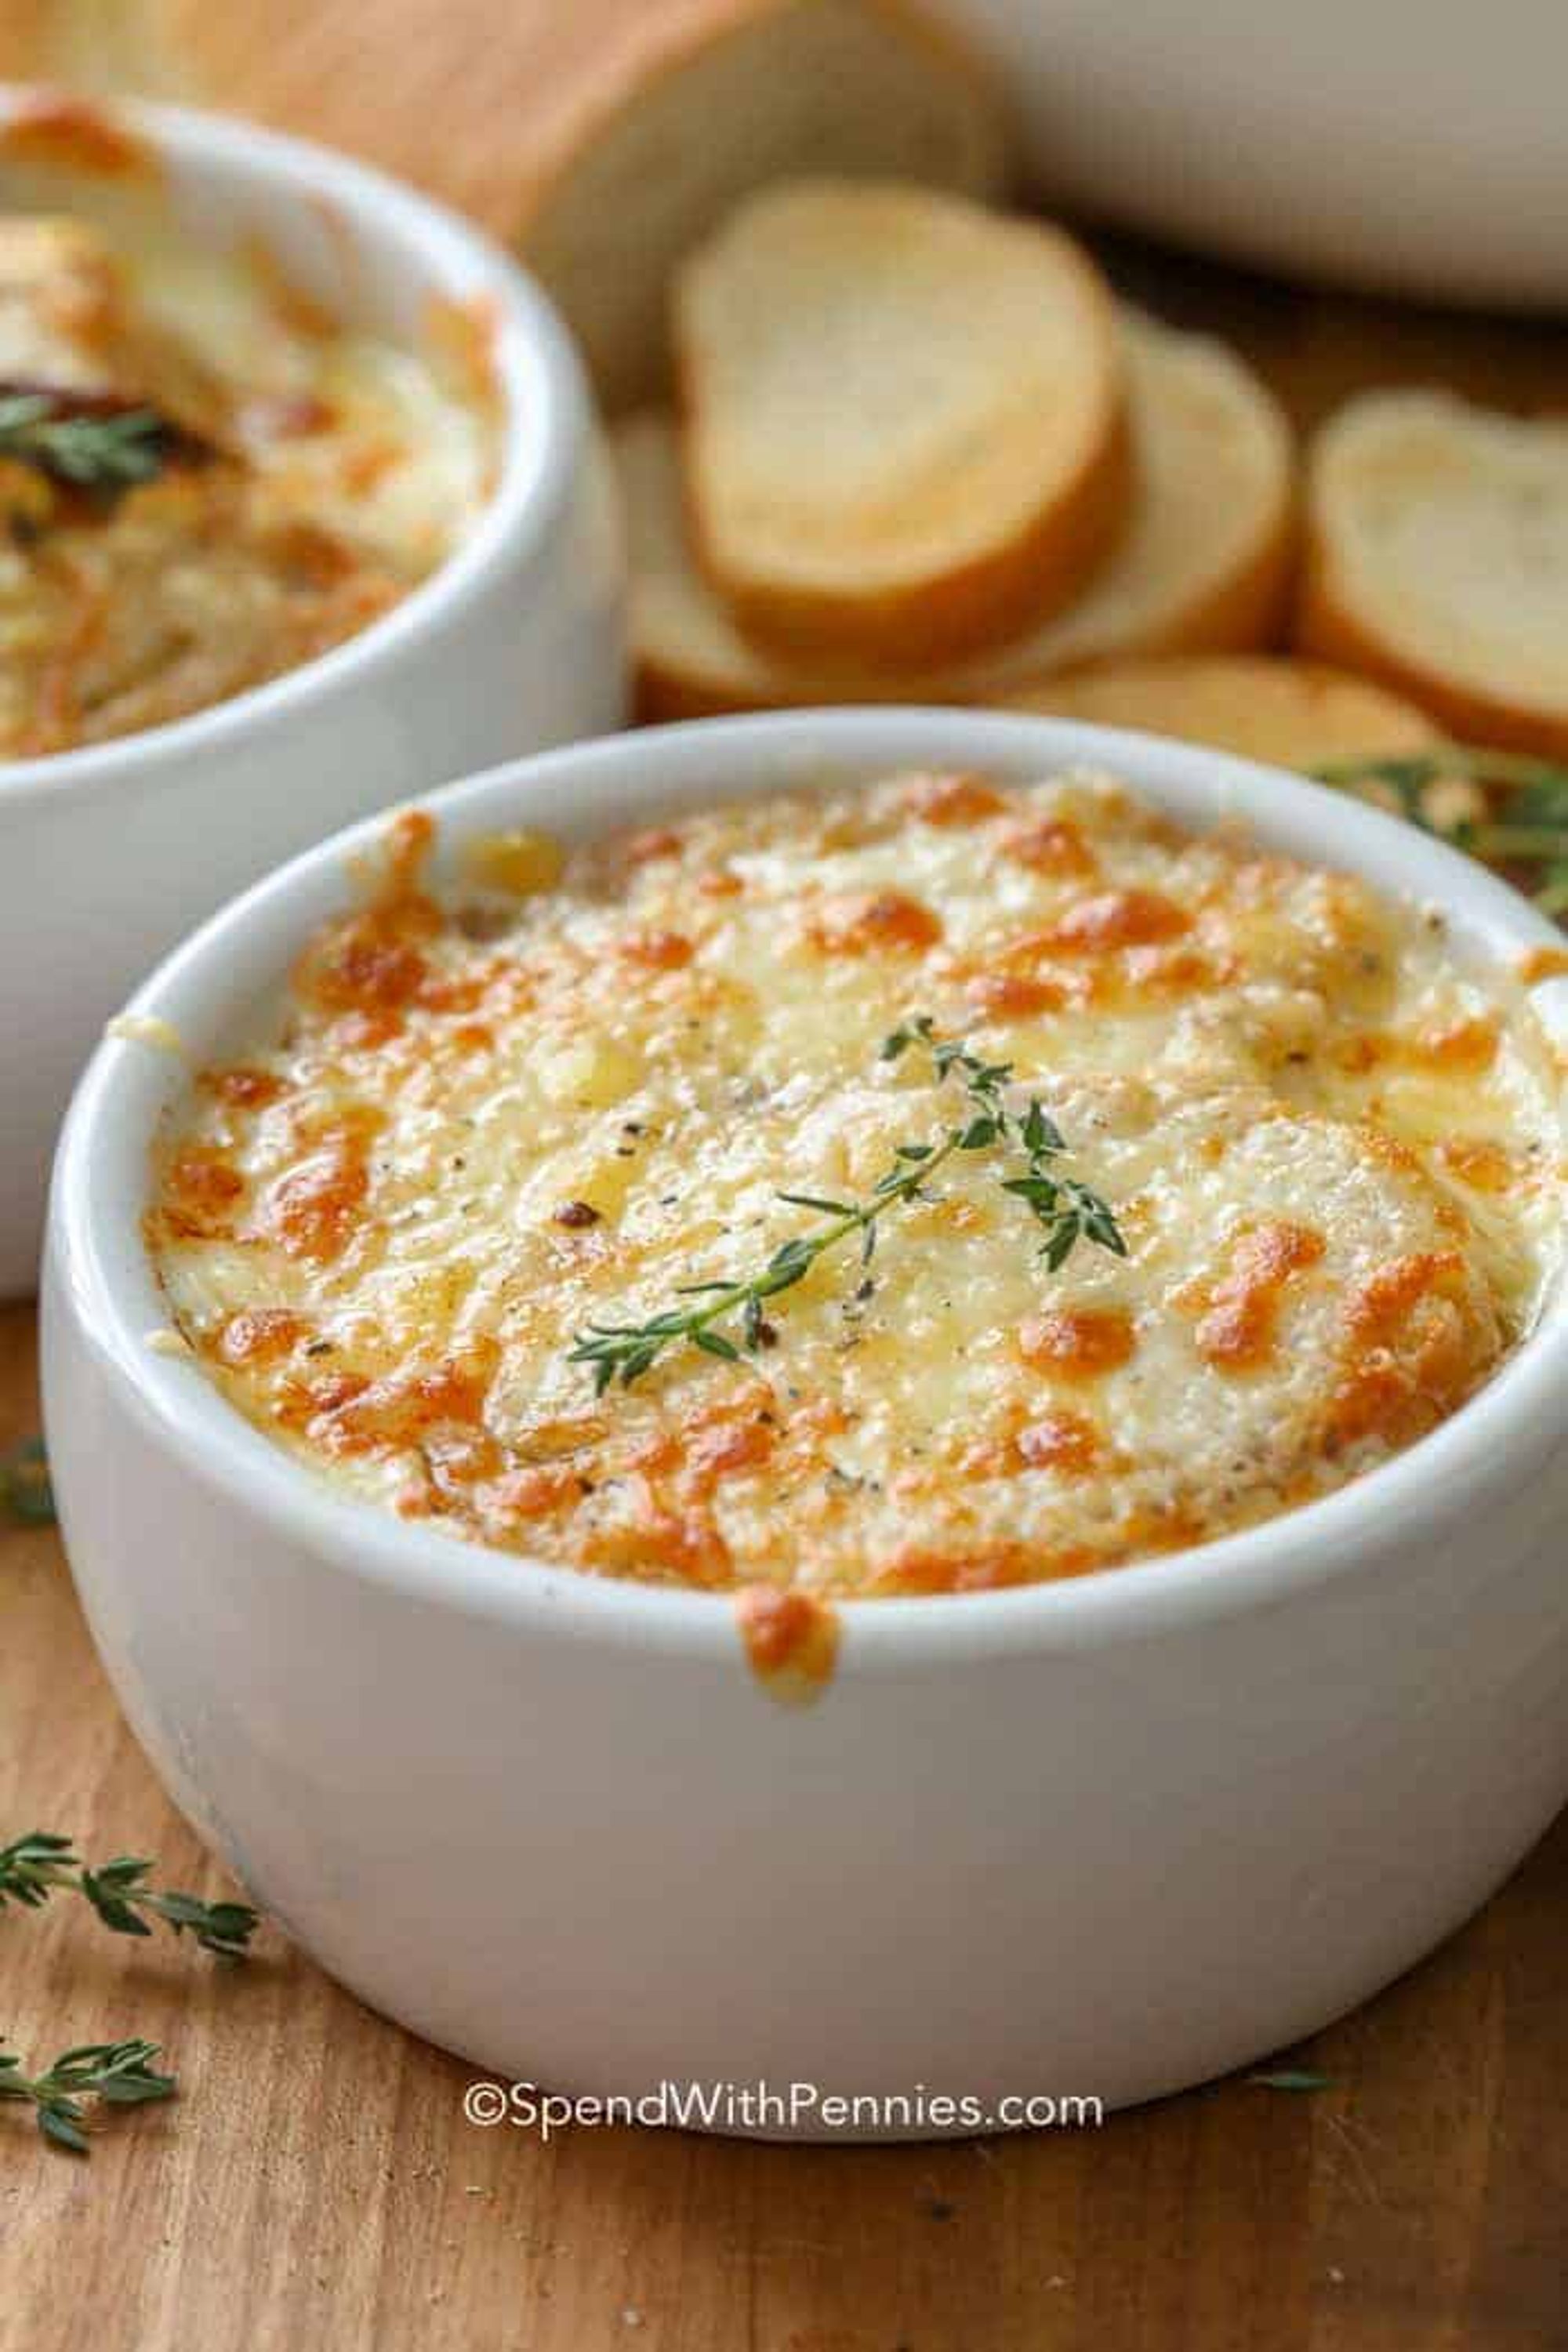 Homemade French Onion Soup - Spend With Pennies - My Recipe Magic